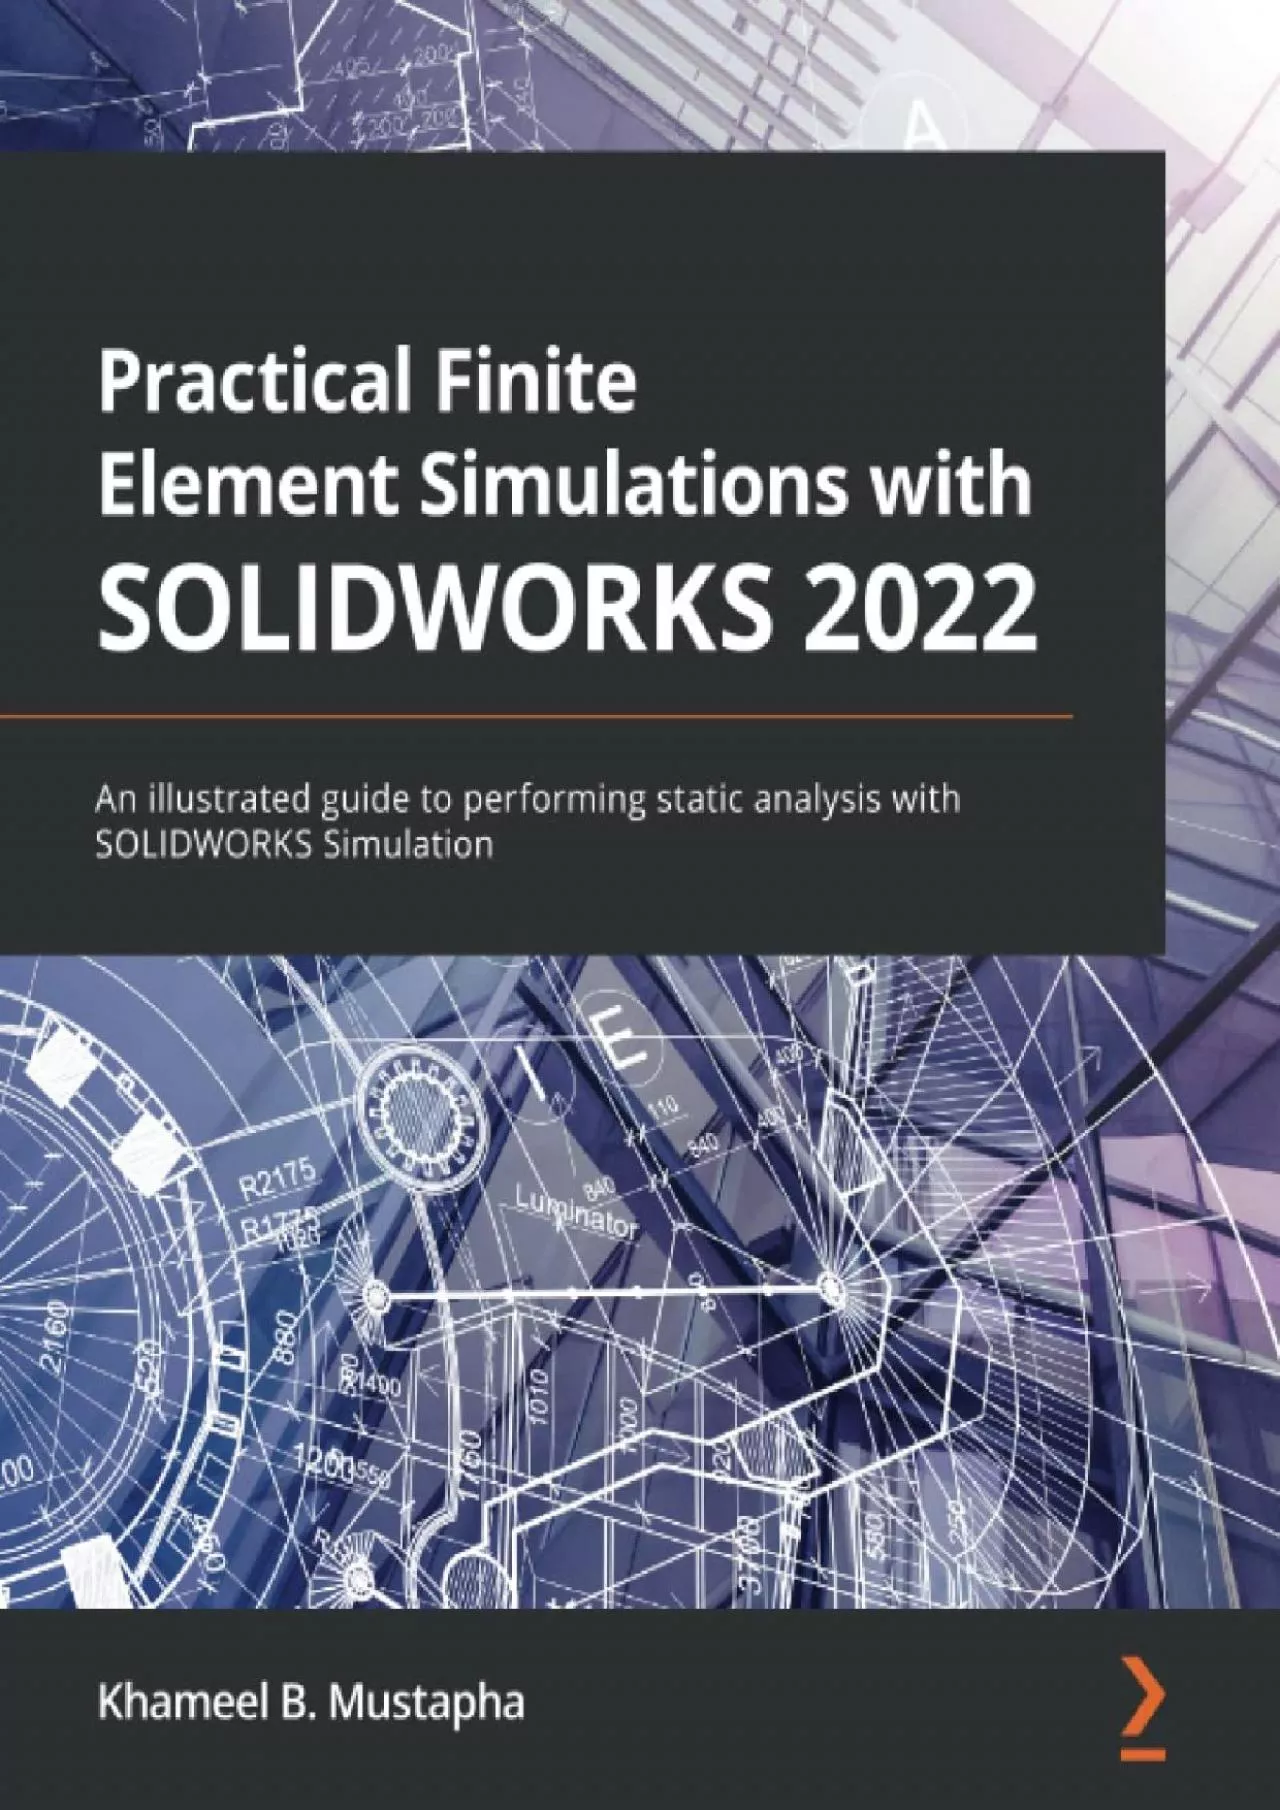 Practical Finite Element Simulations with SOLIDWORKS 2022: An illustrated guide to performing